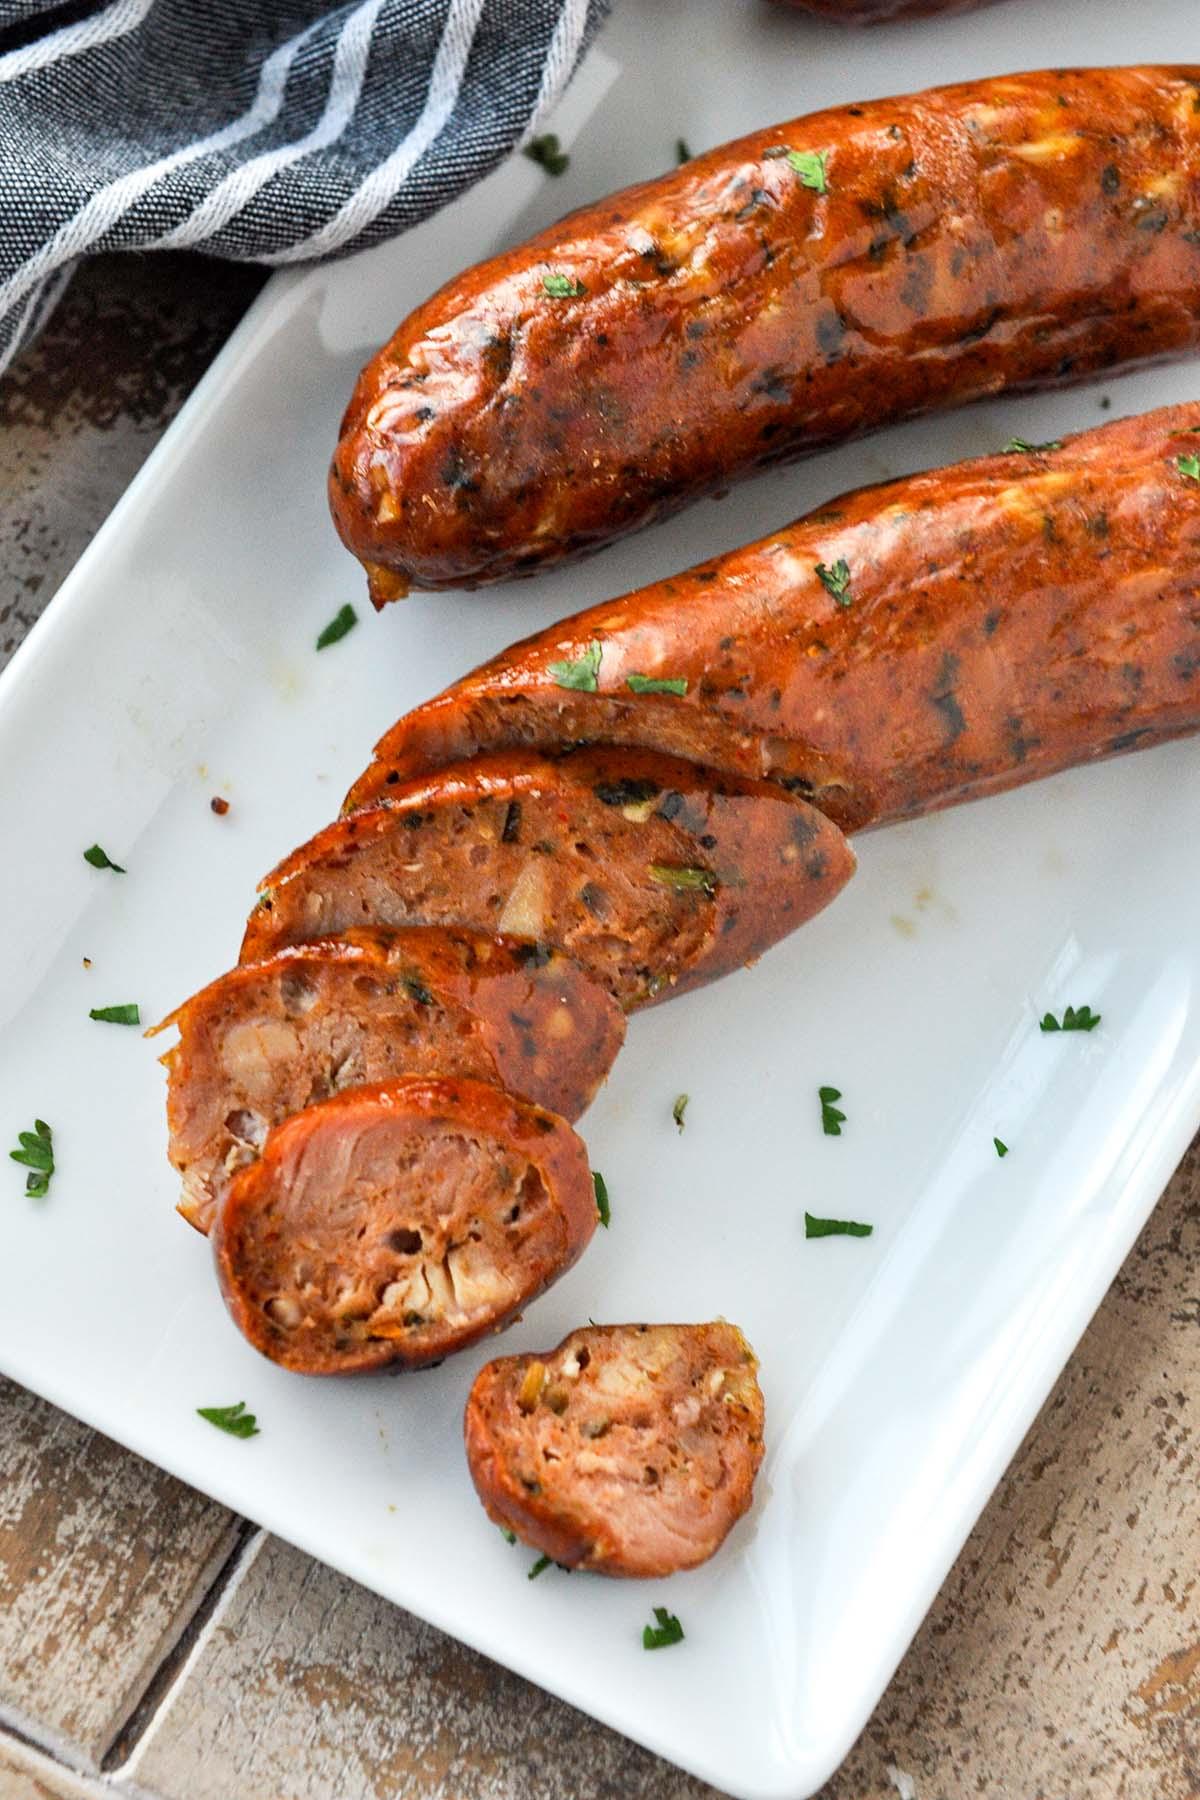 Chicken sausages on a plate with sausage slices.